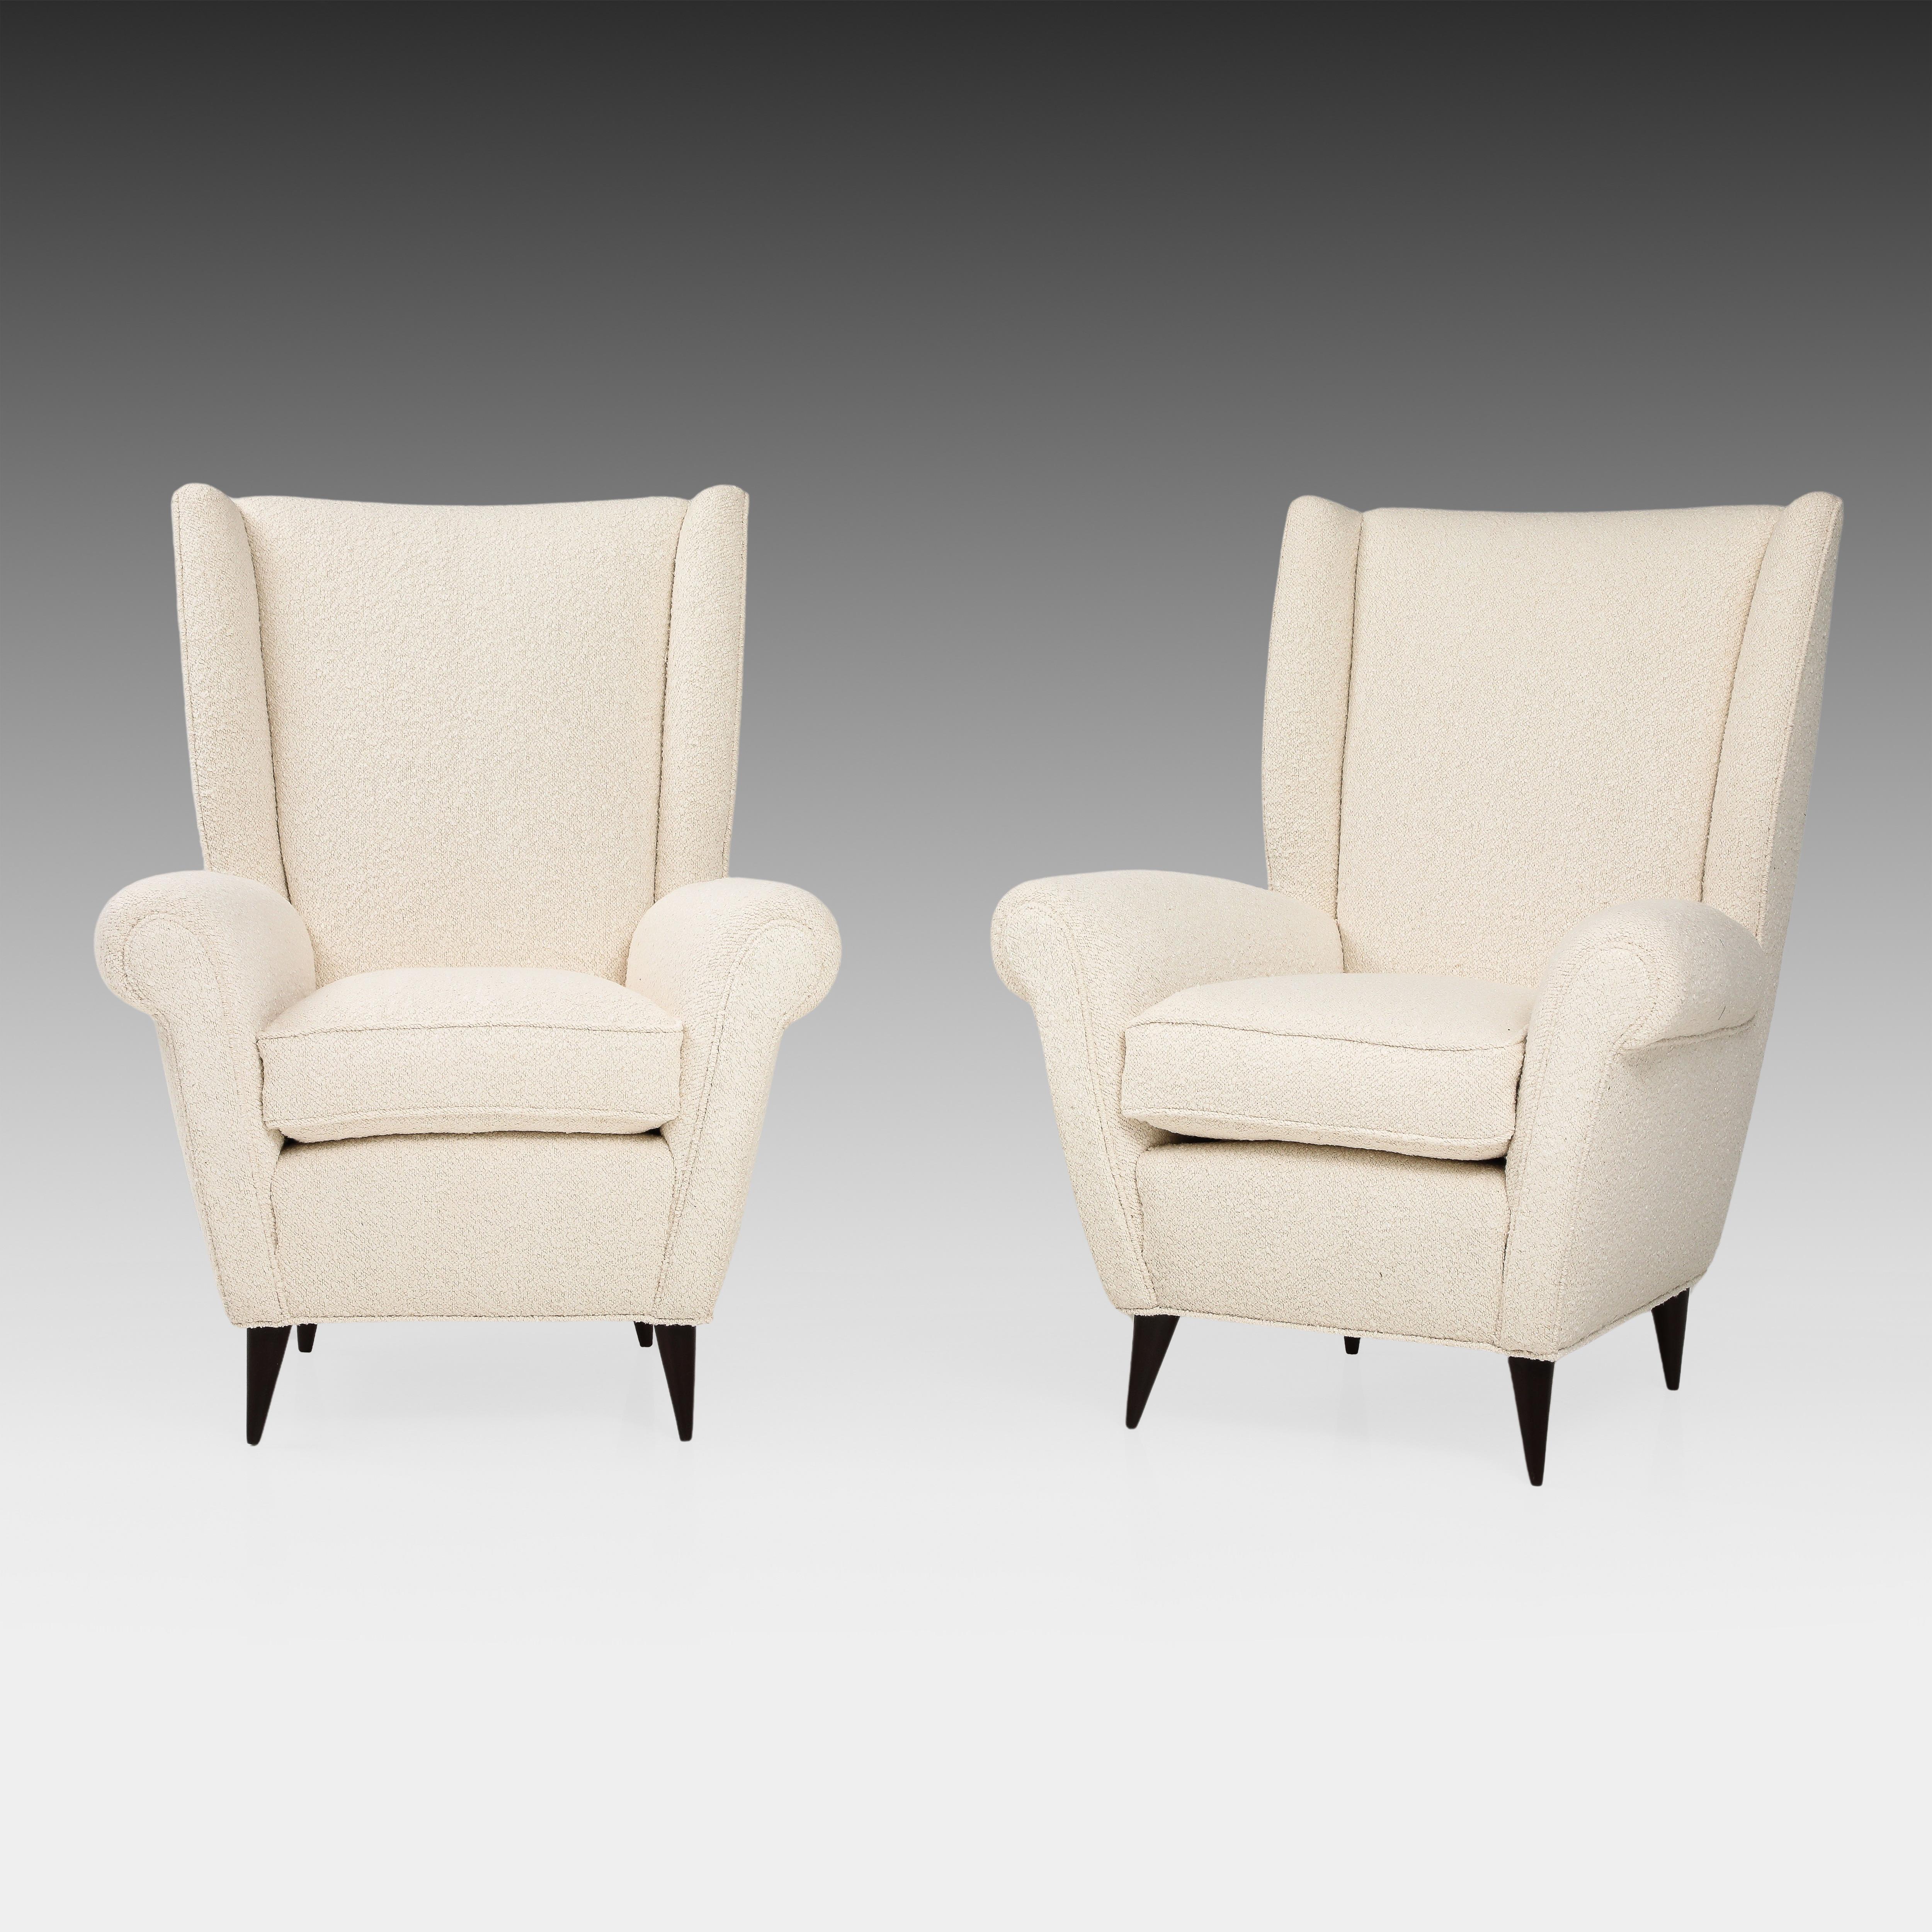 Gio Ponti pair of high back armchairs or lounge chairs in white or ivory bouclé with polished walnut tapering legs.  These chic armchairs have the classic shape of a wingback chair, but with the modernist lines and sculptural expression exemplary of